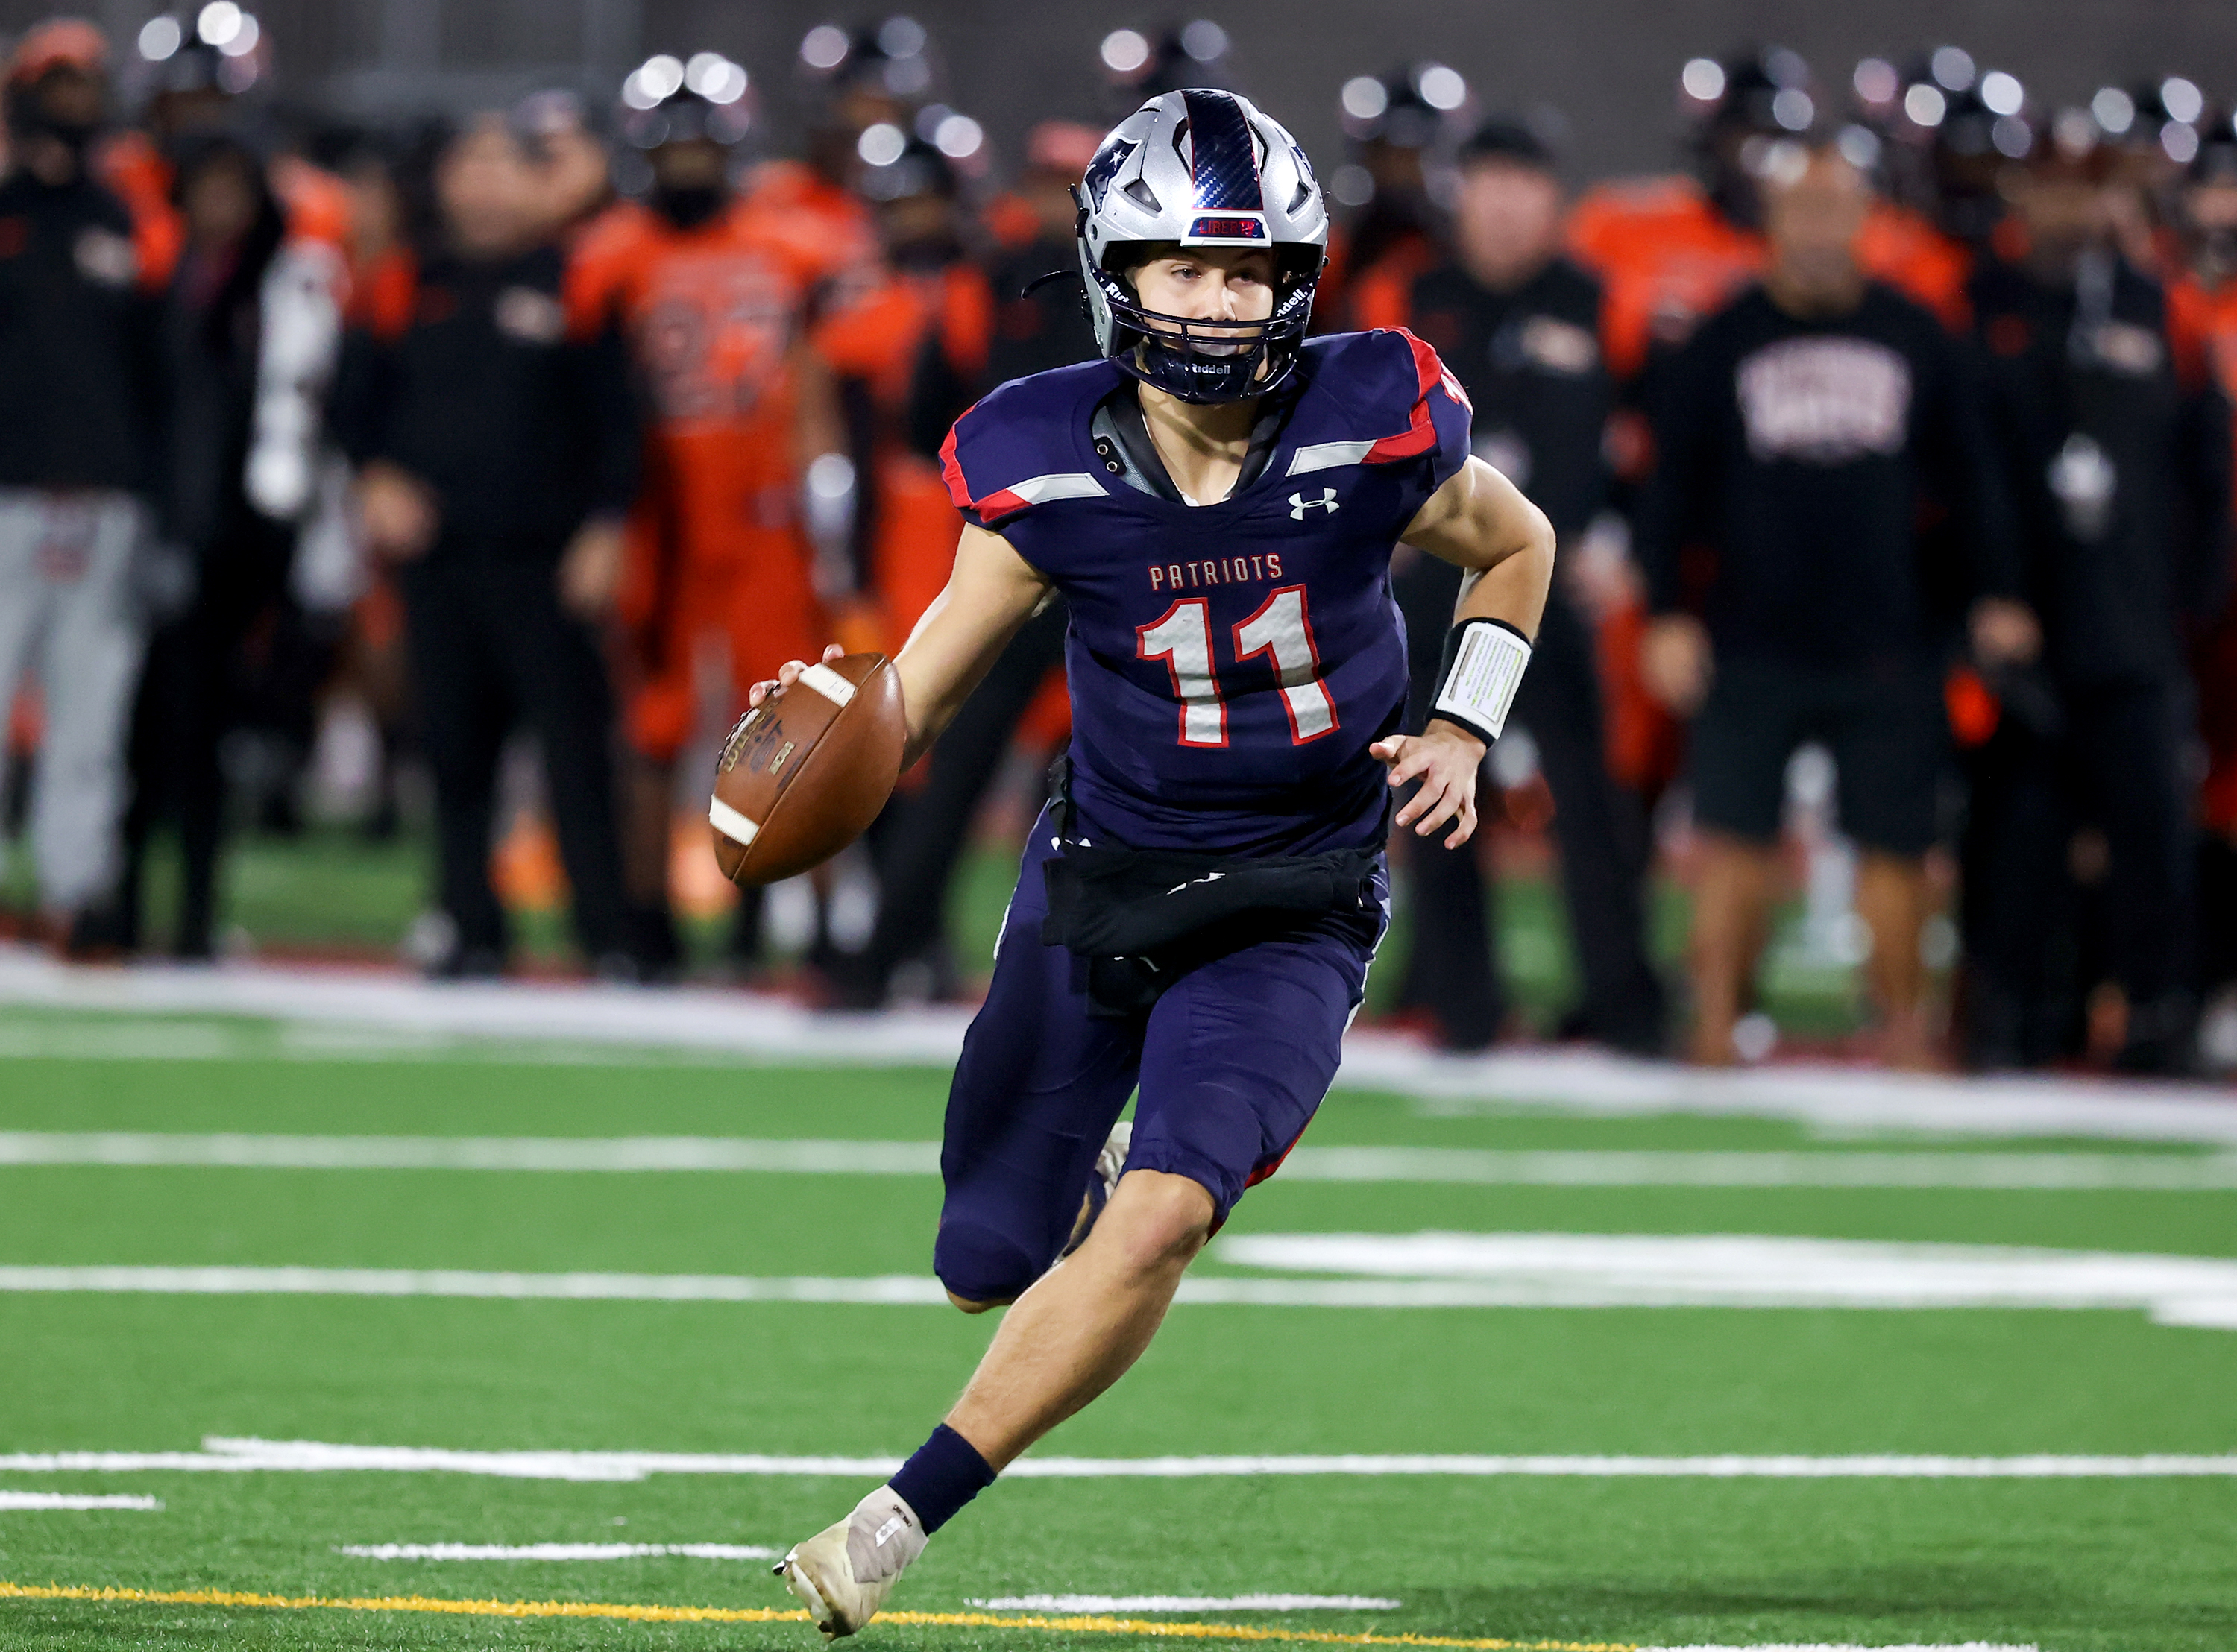 Cole O'Brien (11) can run as well as pass as he showed in last season's CIF State Division I-AA championship win over Pittsburg. Photo: Joe Bergman    